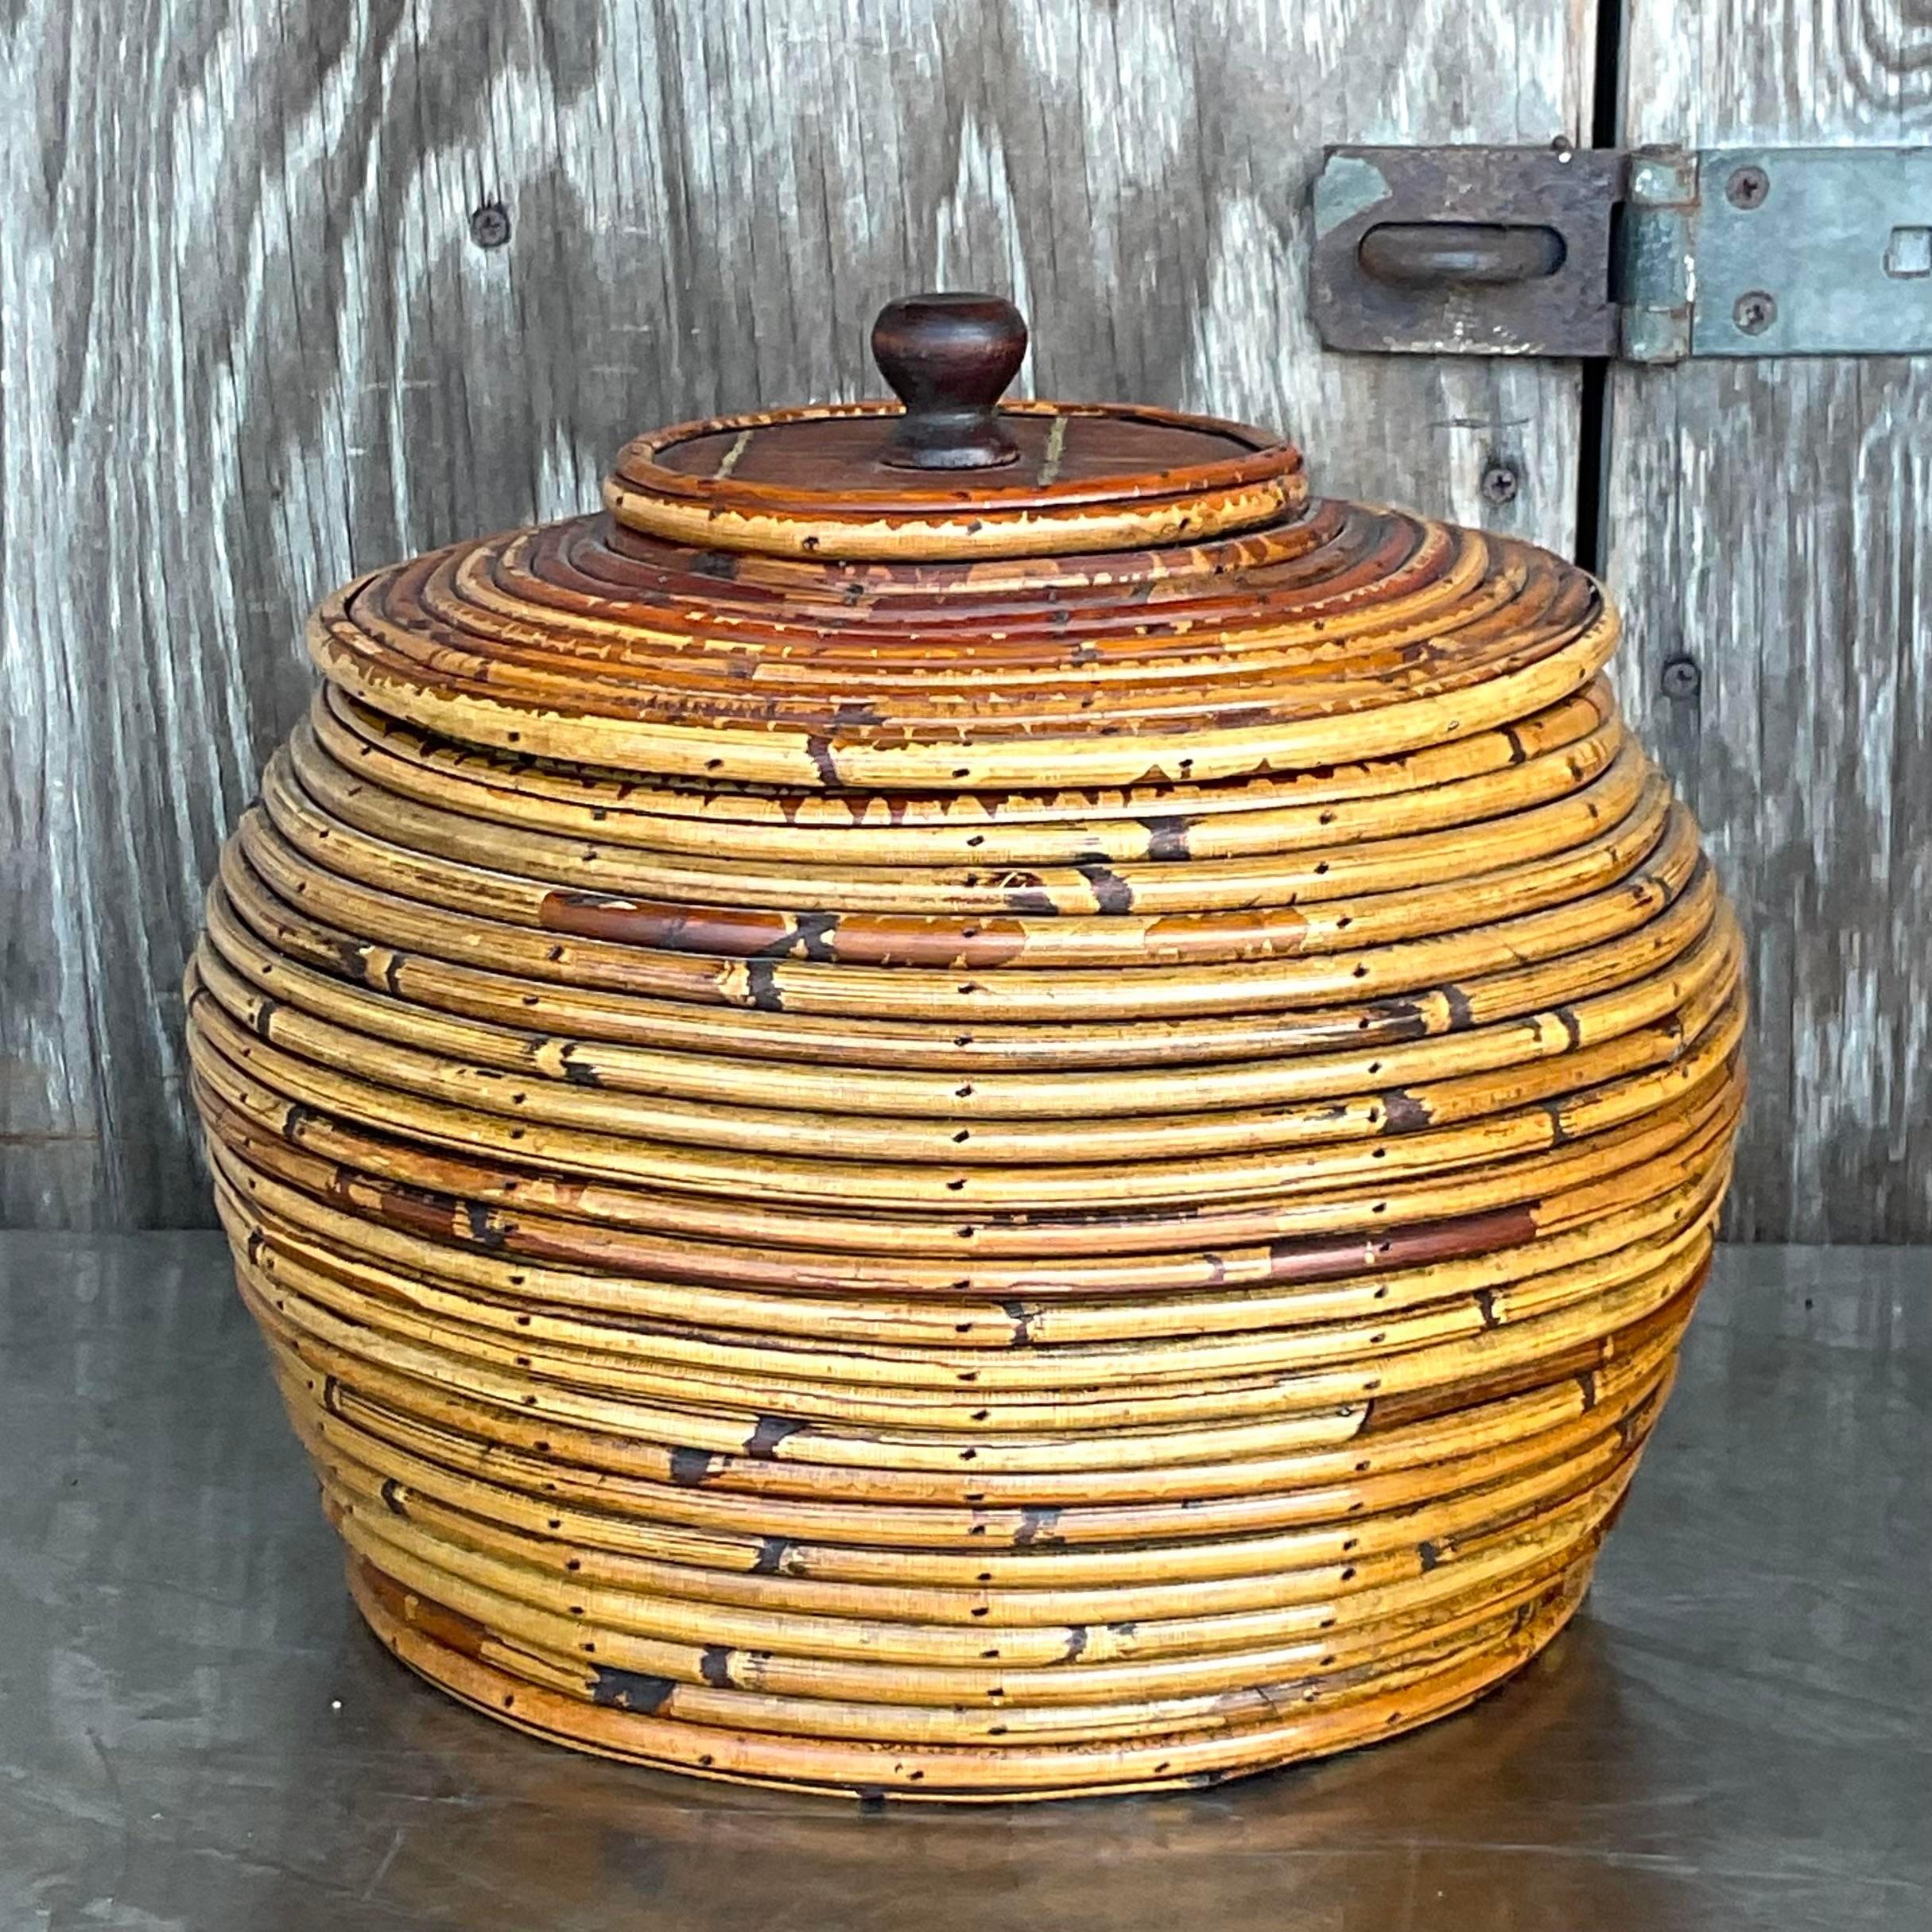 A fabulous vintage Coastal lidded urn. A chic coiled pencil reed in warm brown tone. Coordinating tall urn also available on my Chairish page. Acquired from a Palm Beach estate.